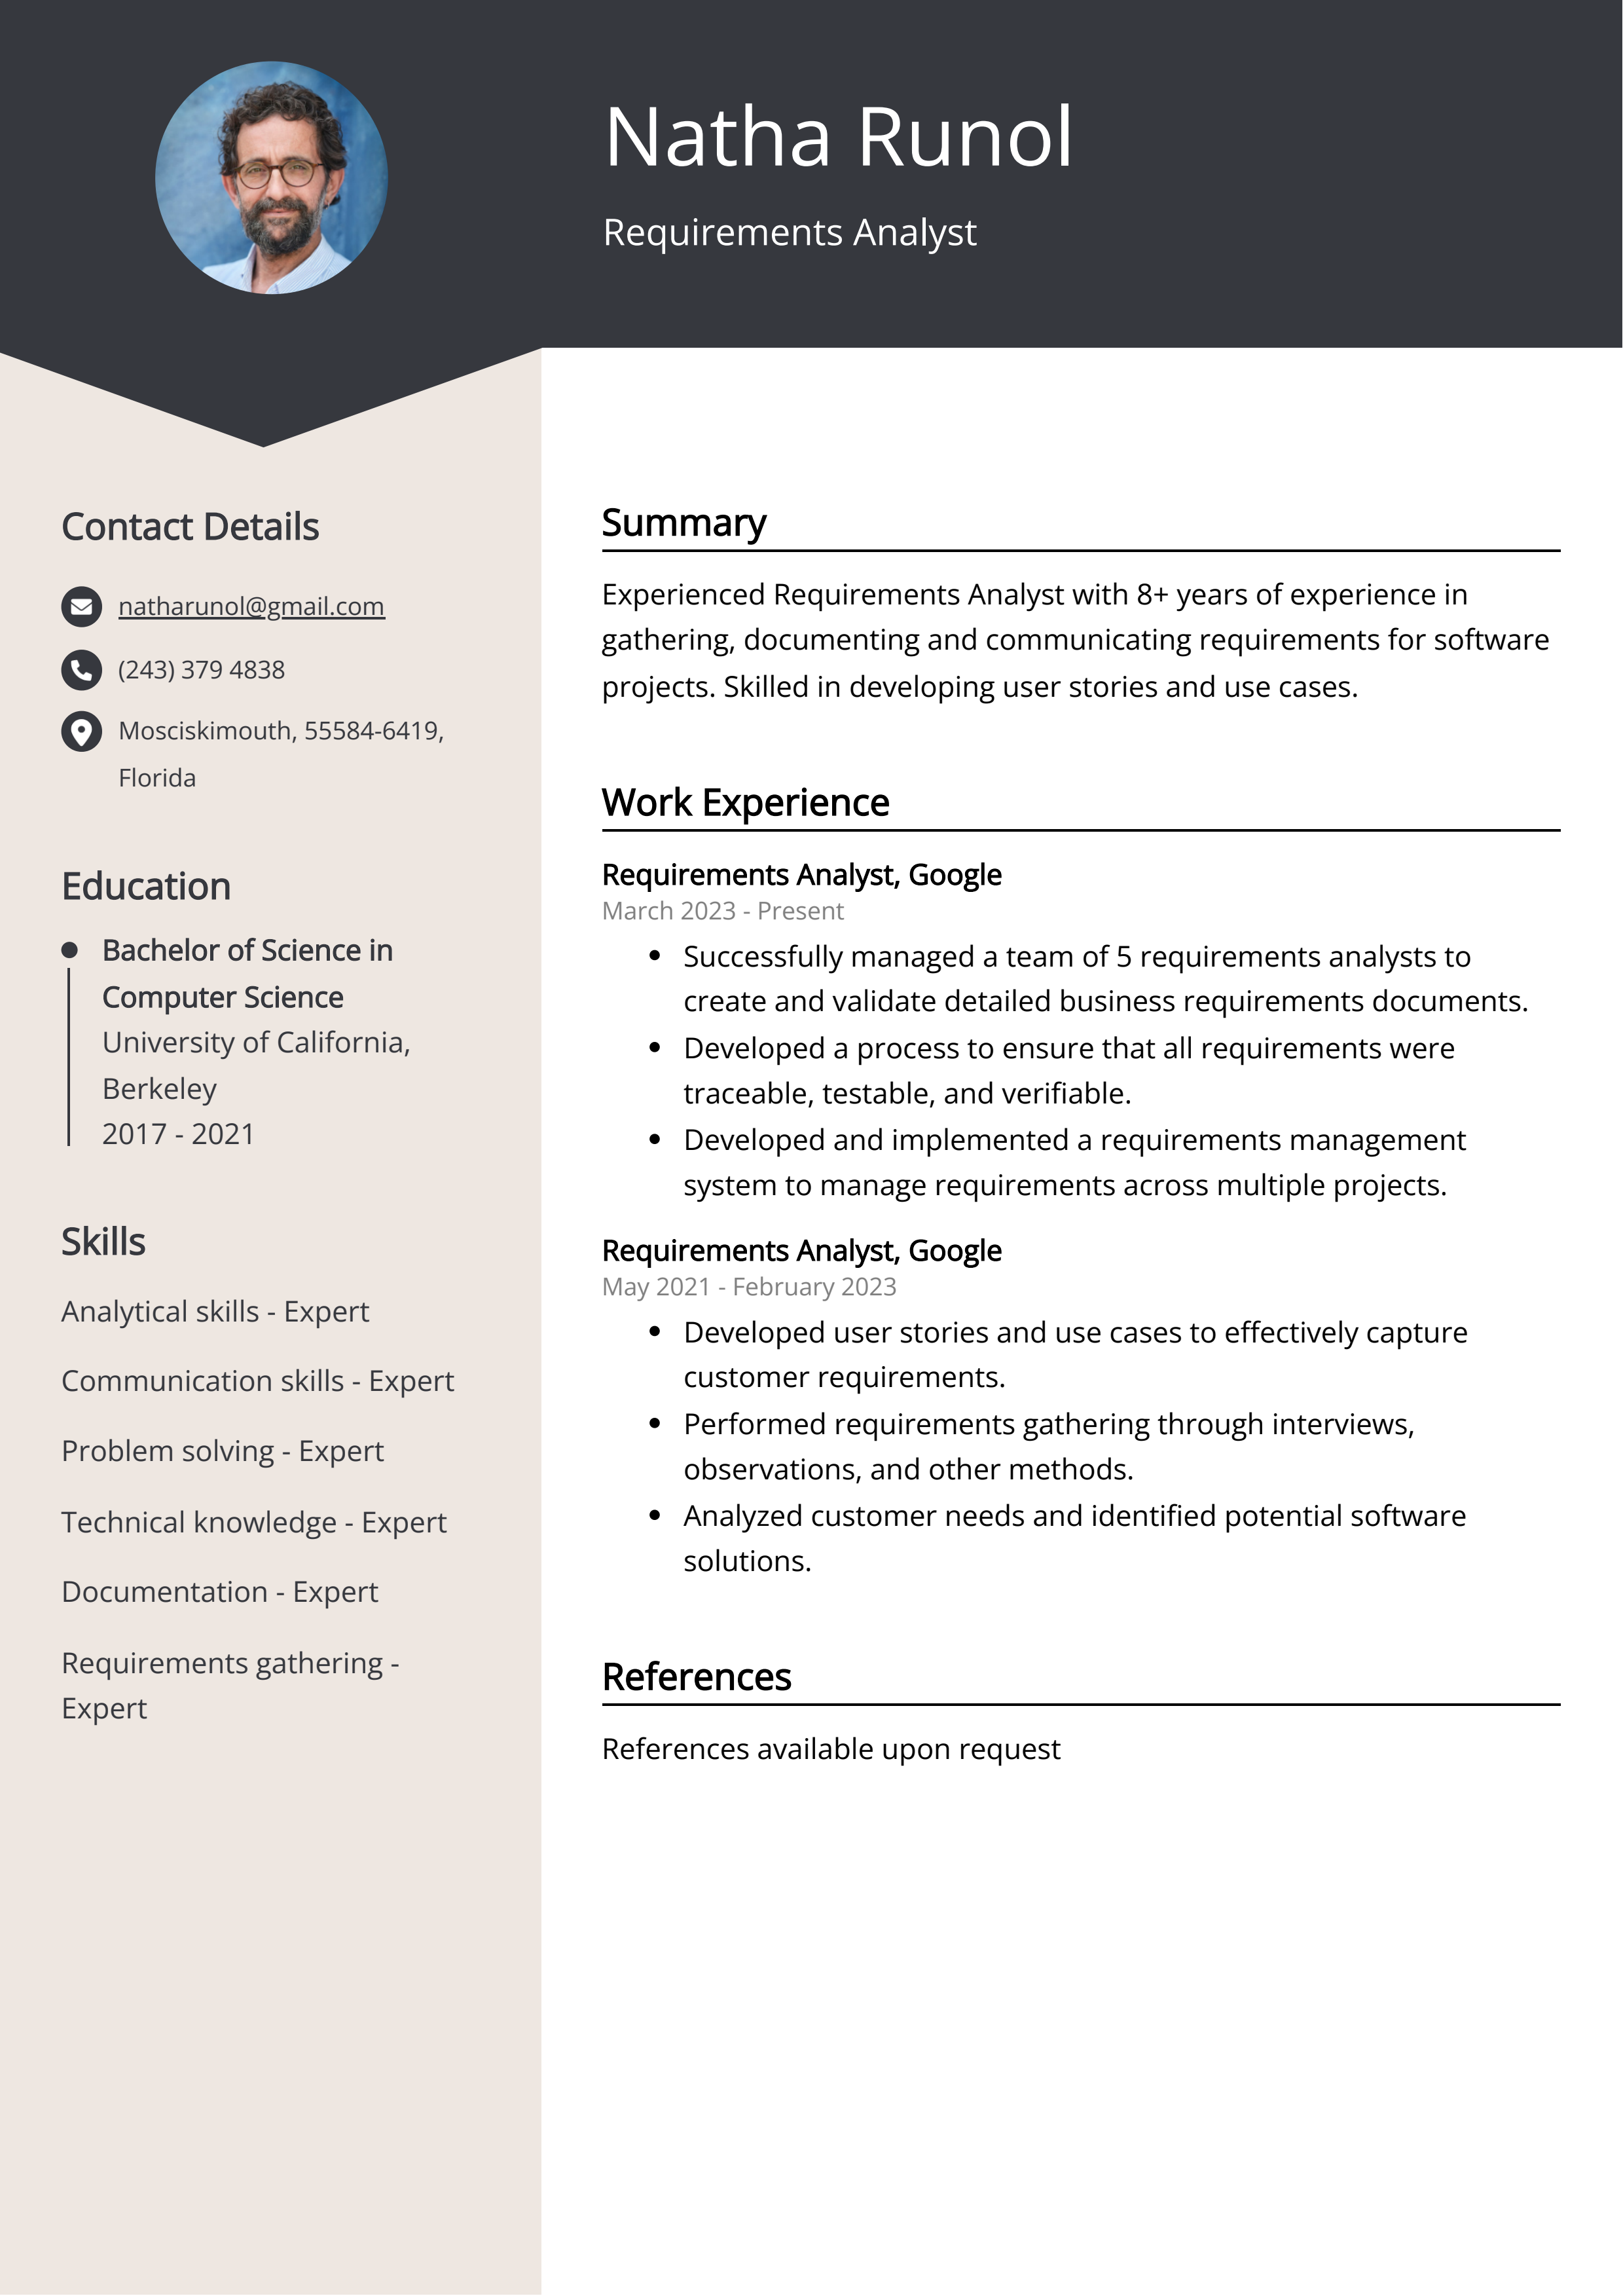 Requirements Analyst Resume Example